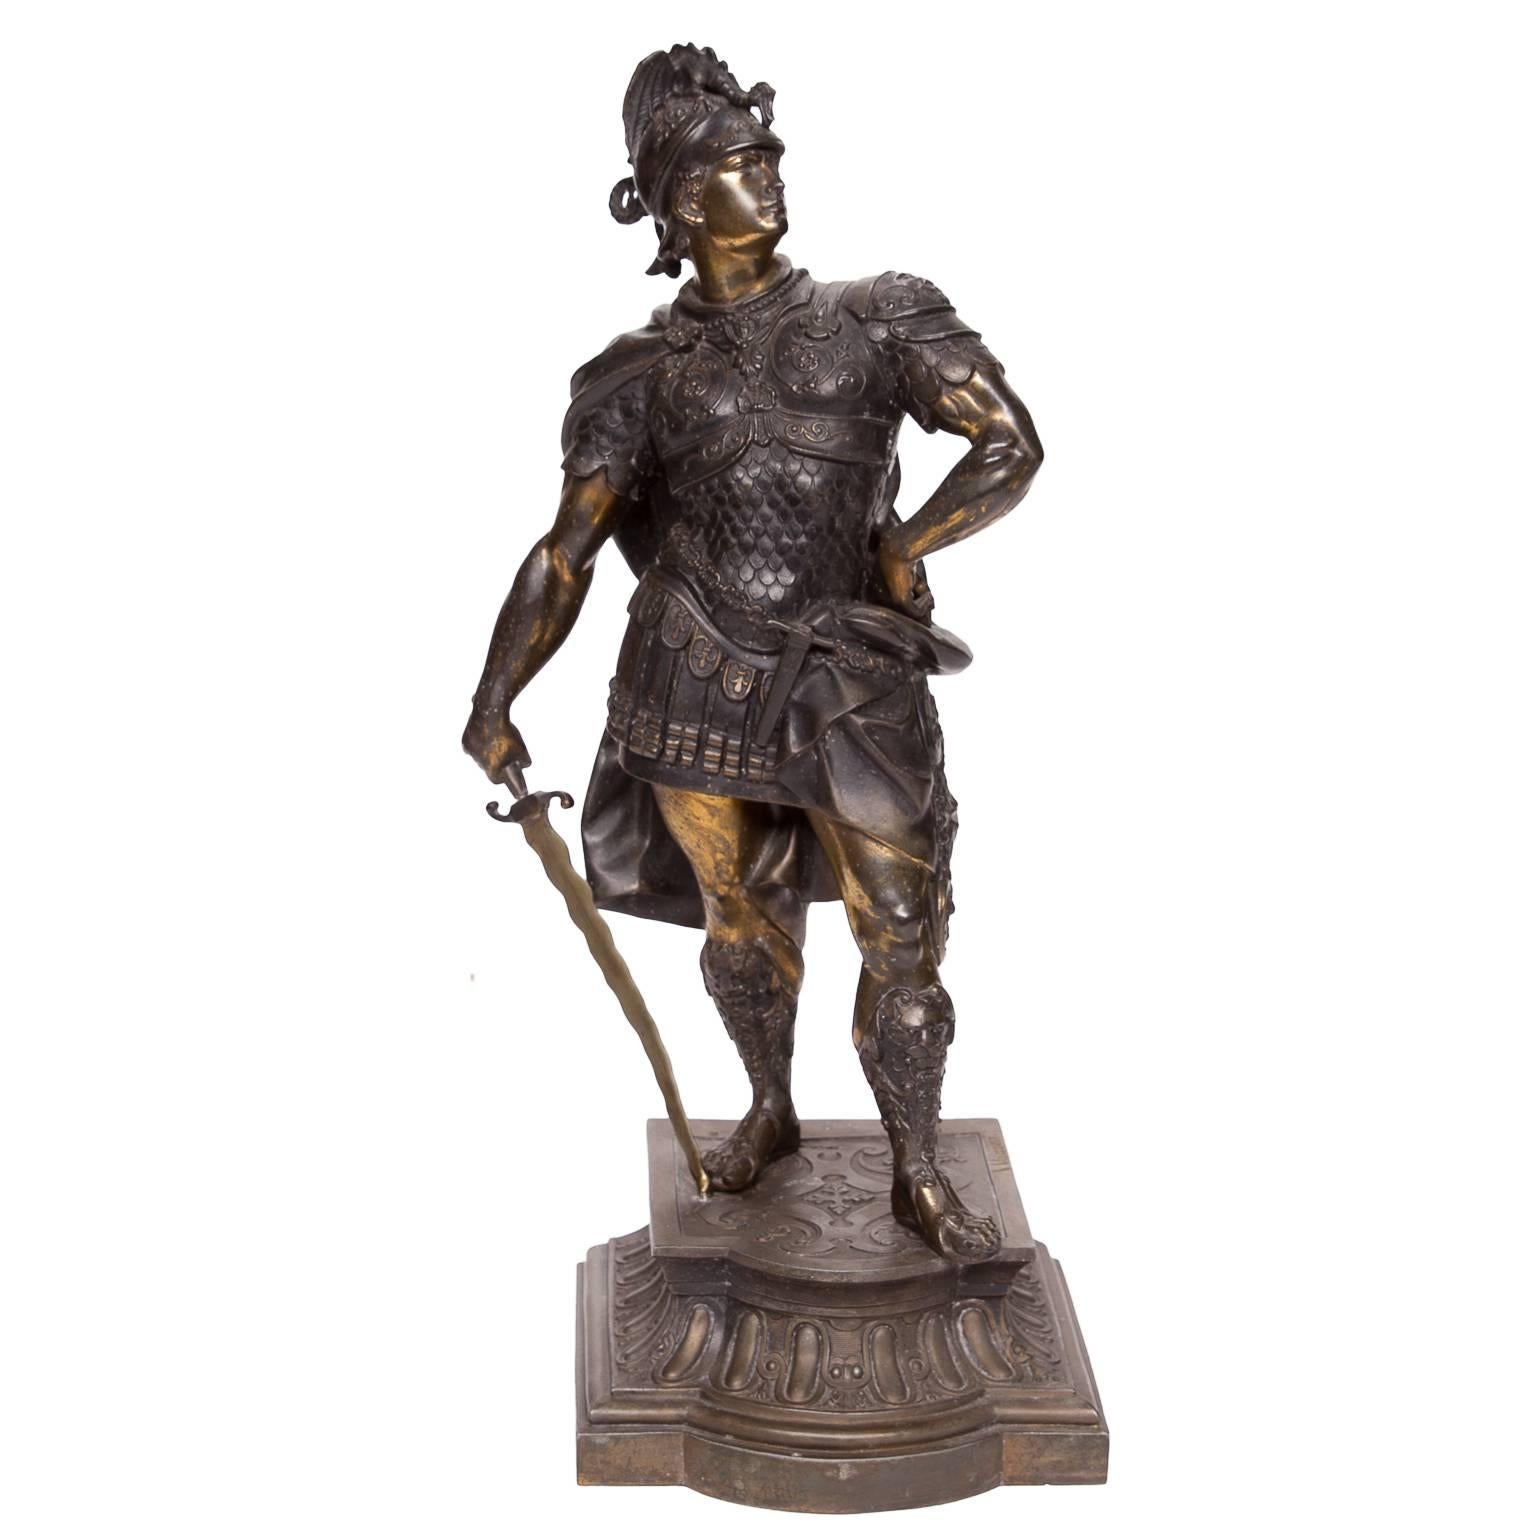 Cast Pair of 19th Century Signed Warrior Figures in Spelter Metal